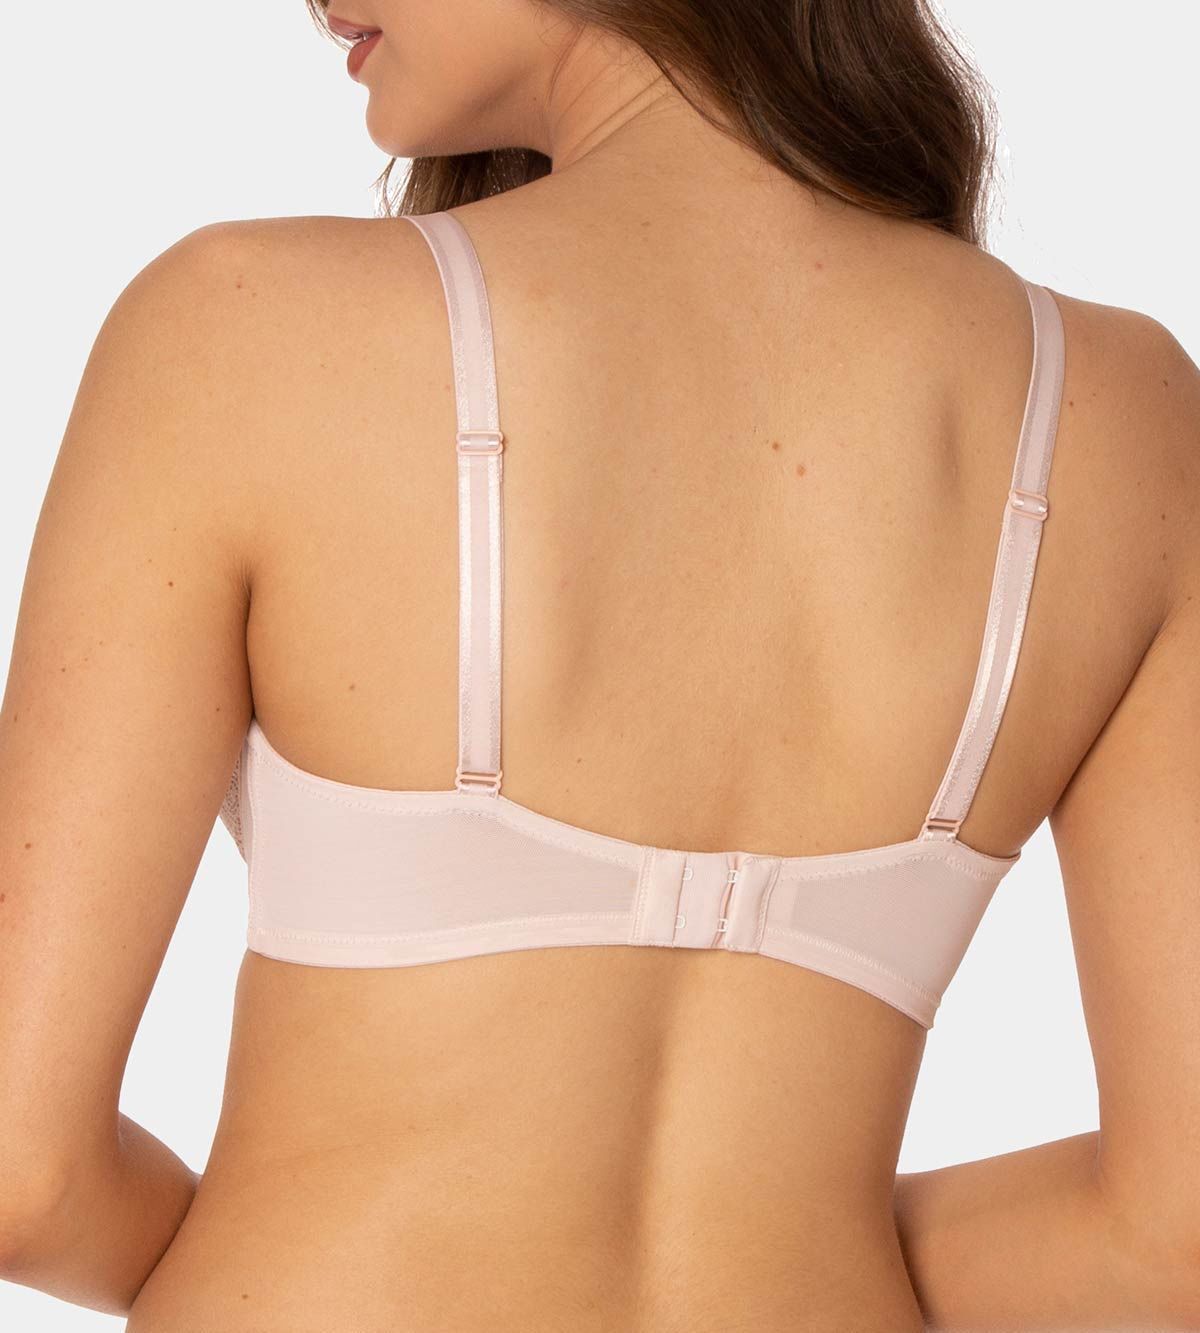 Berlei Lingerie - Our B581 Underwired Minimiser Bra is trusted to provide  great support in a full coverage wired shape. Check out our B581 Underwired Minimiser  Bra in the link